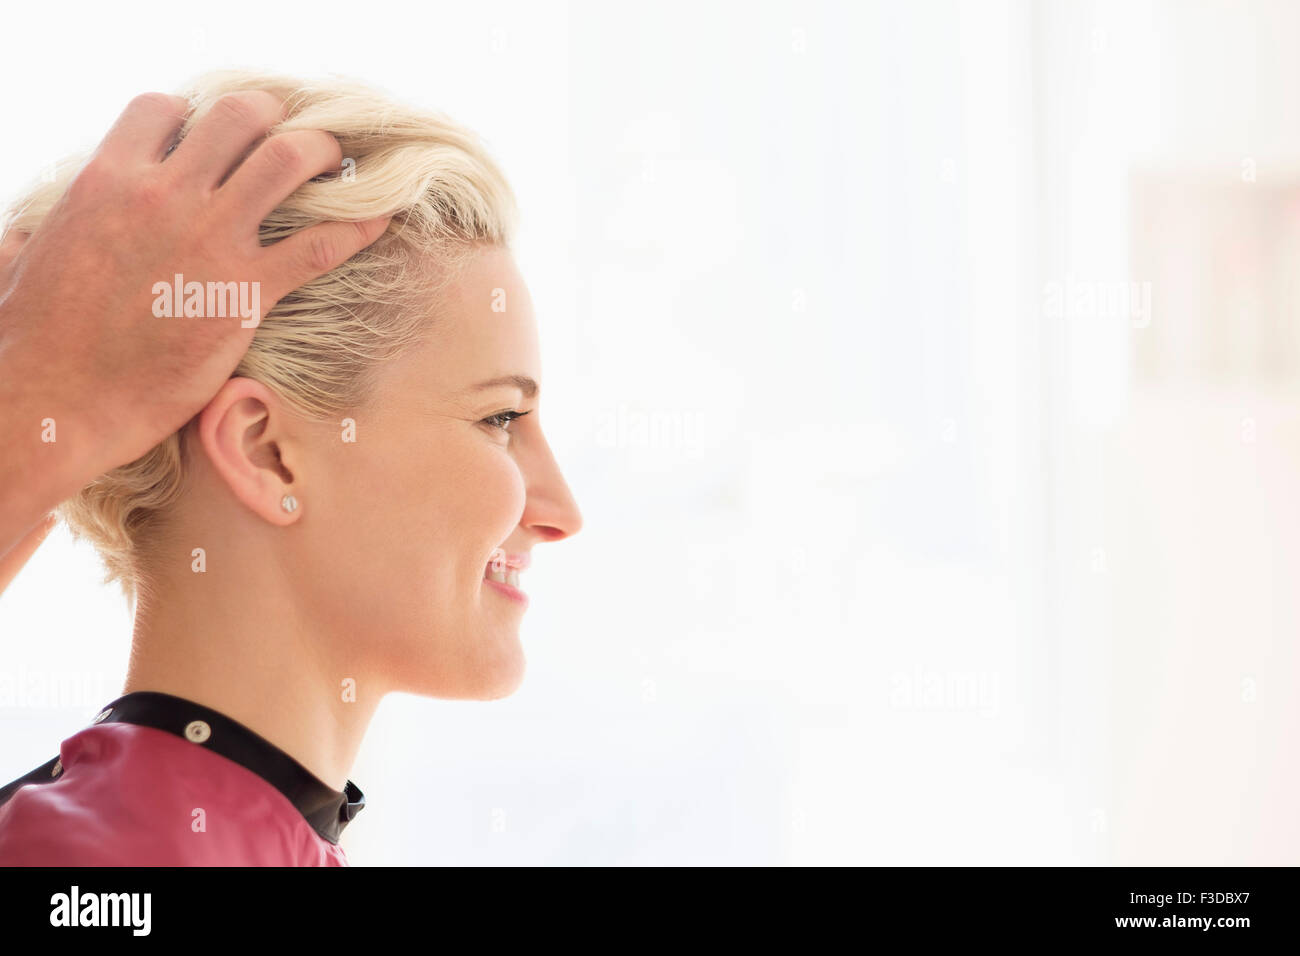 Hairdresser styling woman's hair Stock Photo